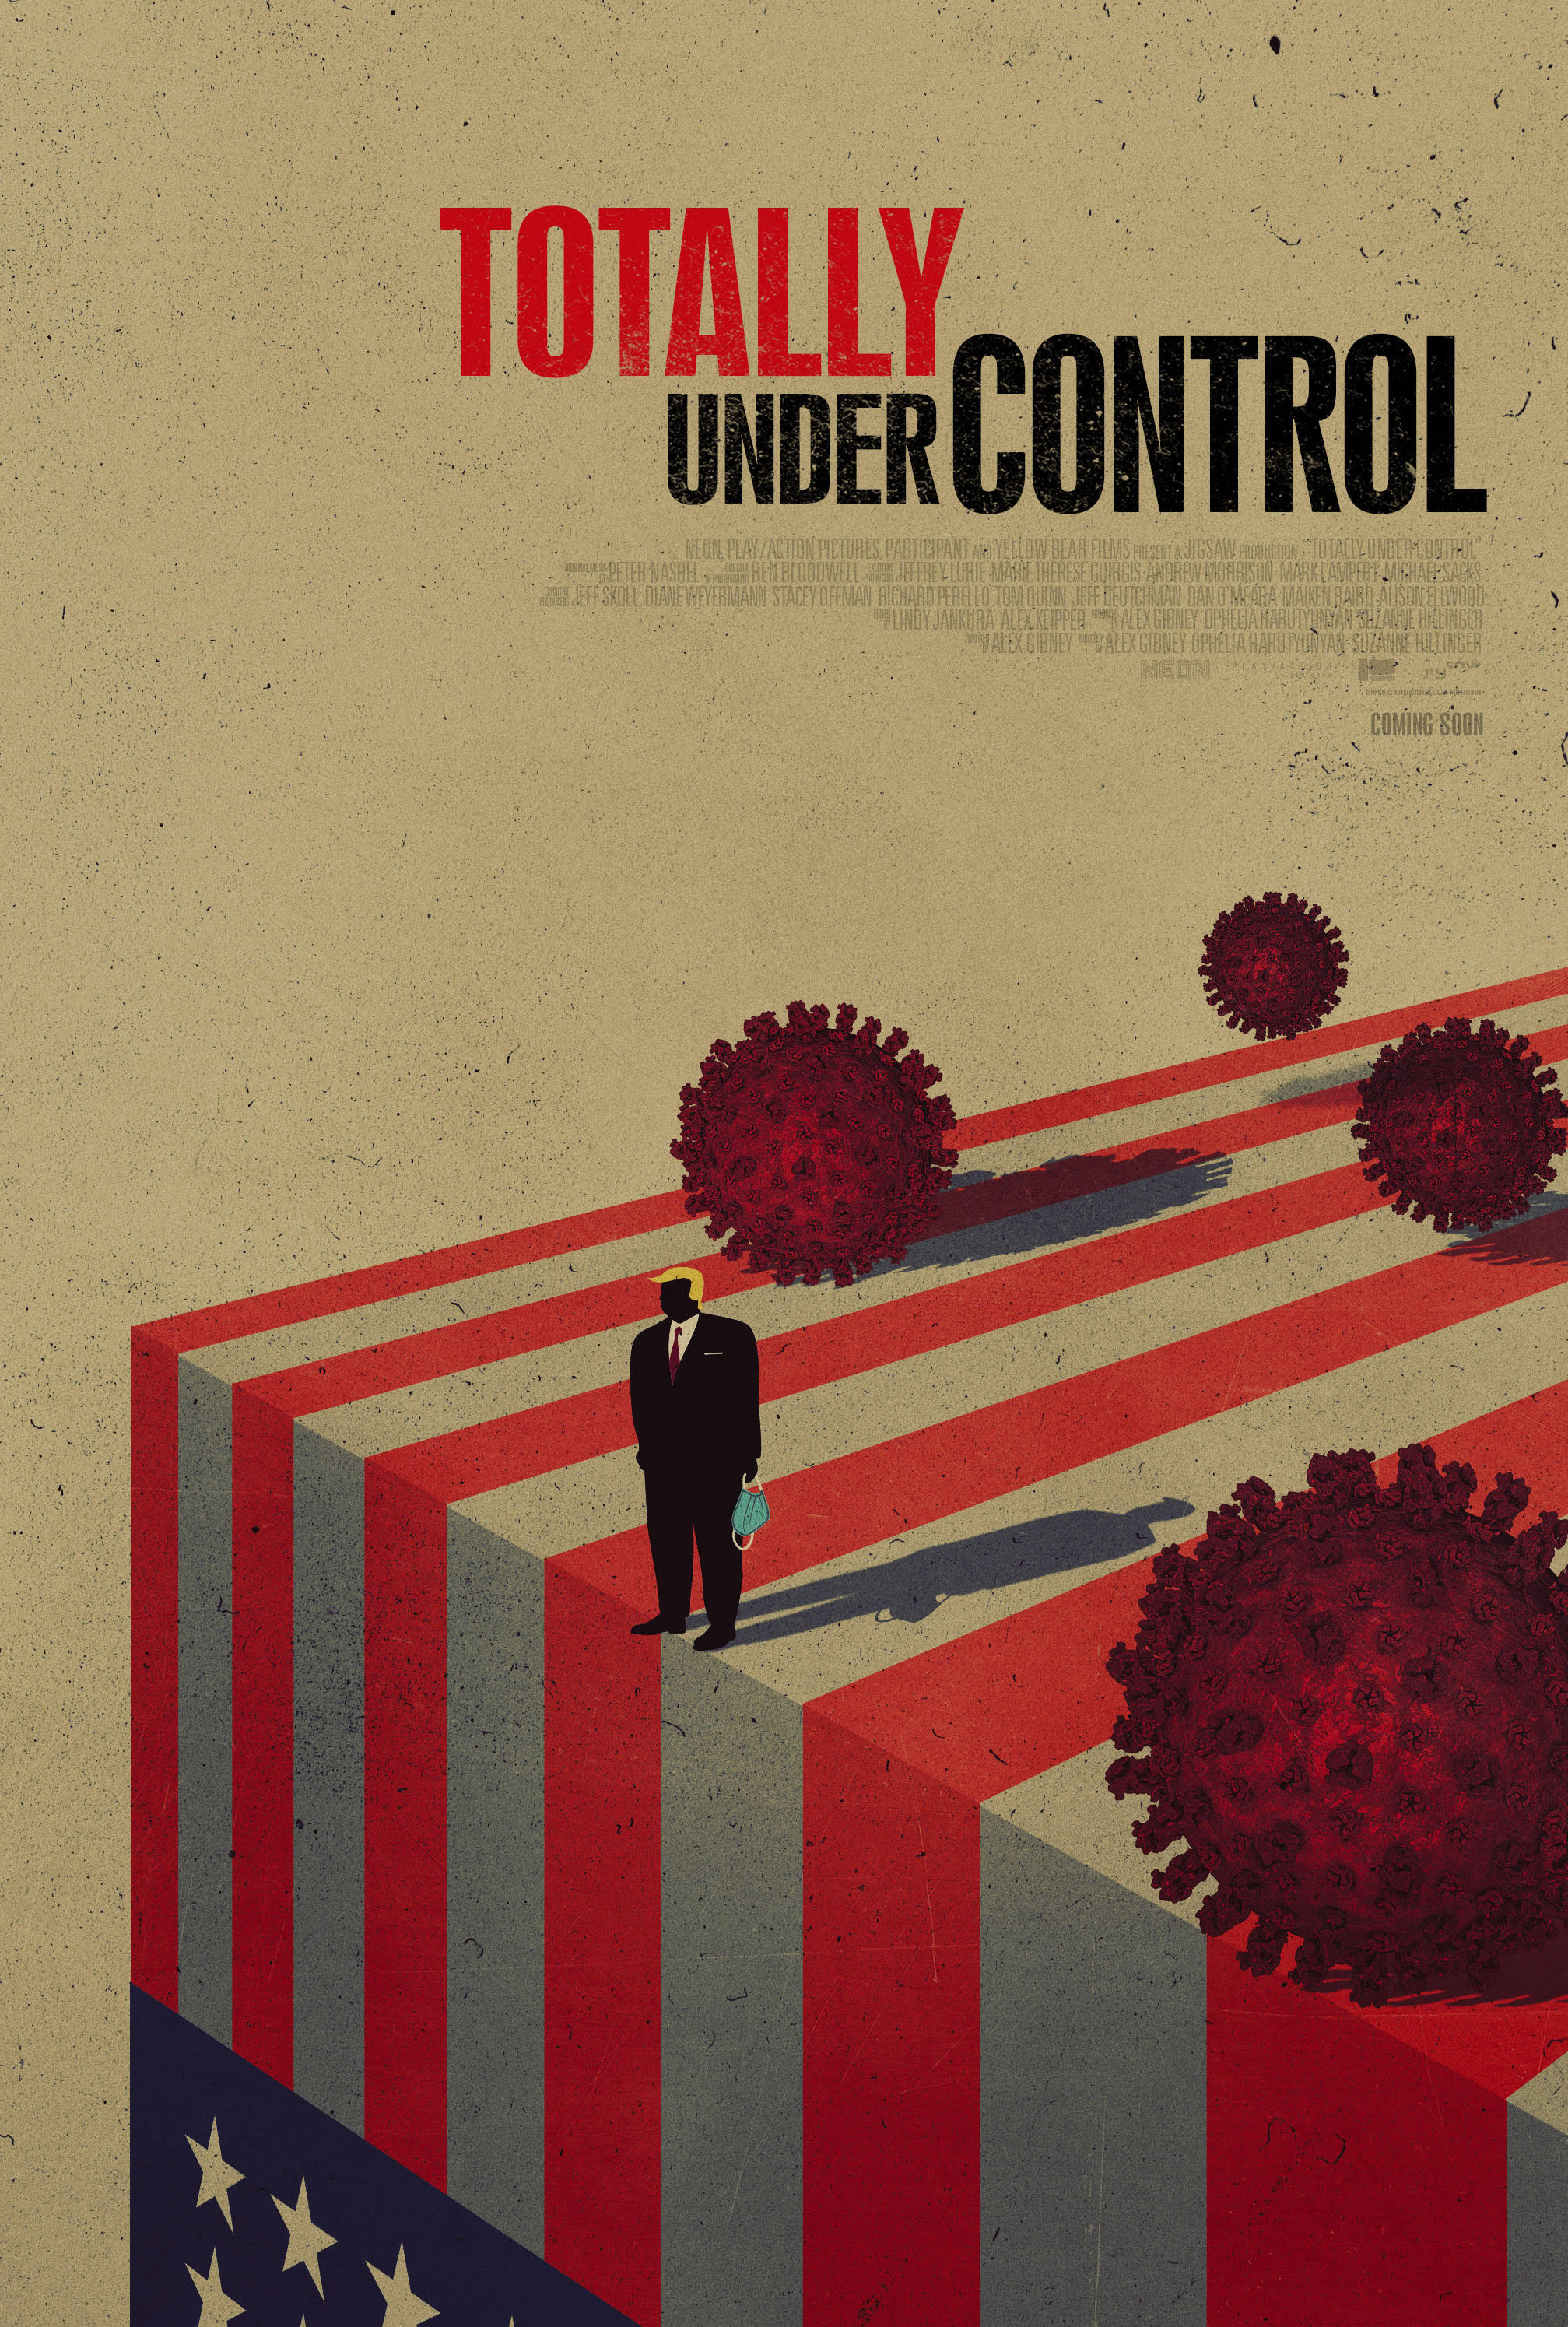 Mega Sized Movie Poster Image for Totally Under Control 